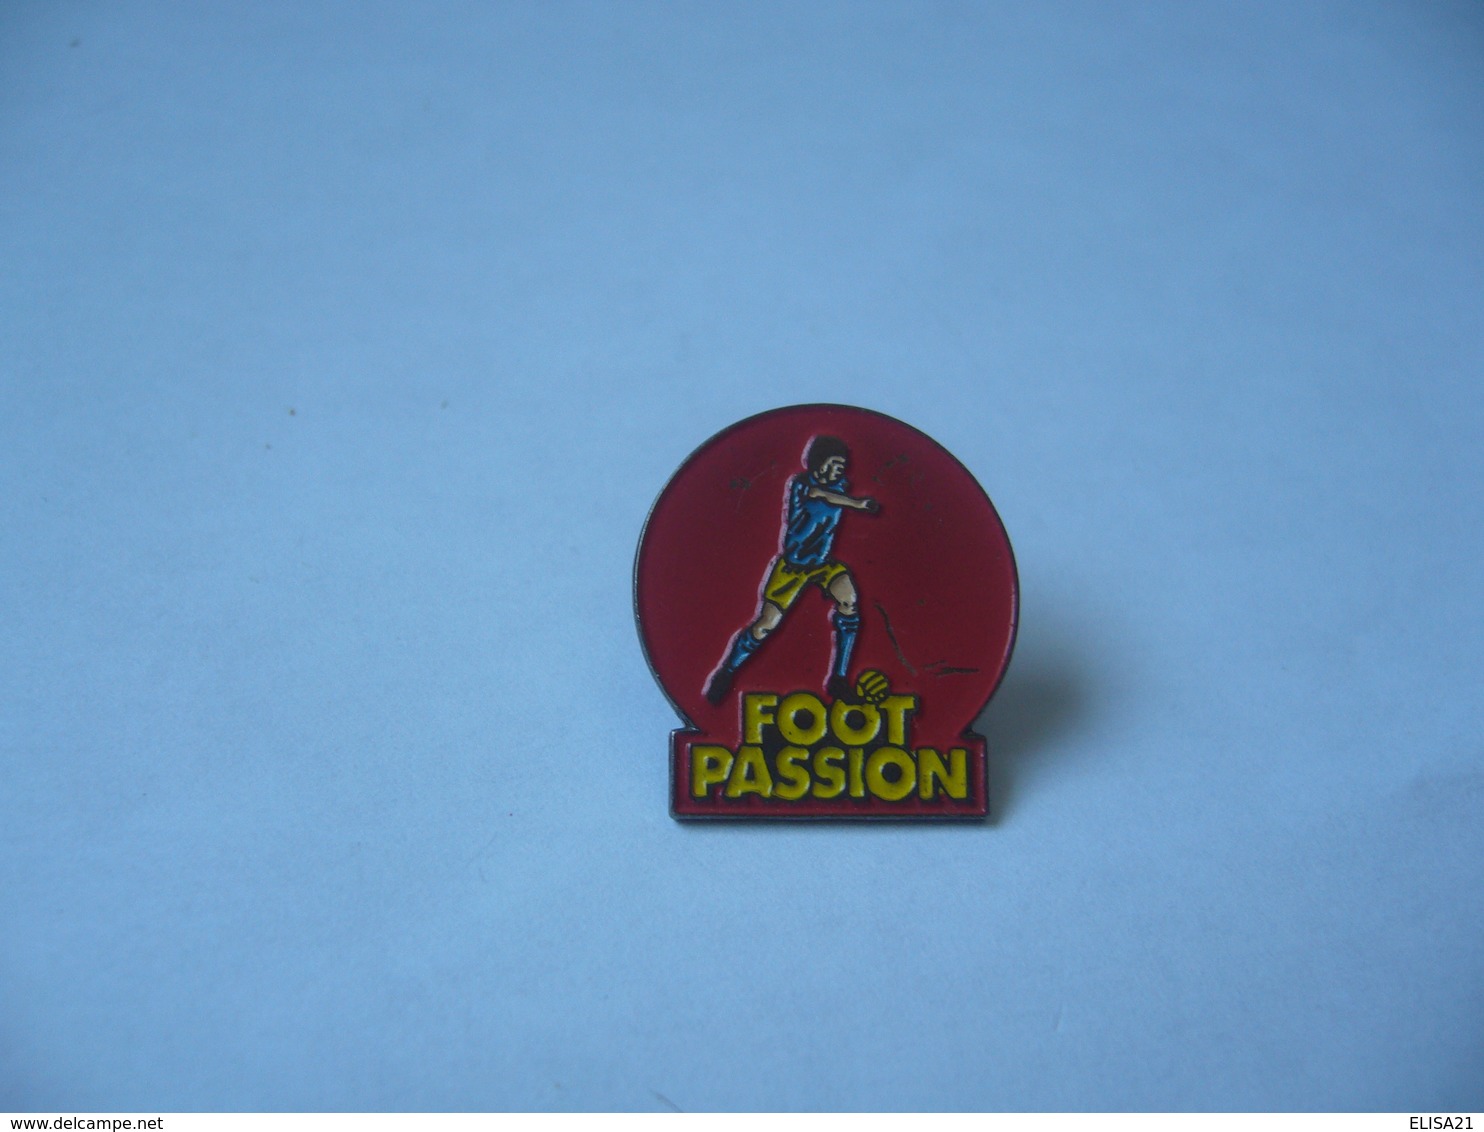 Pin on Football Passion